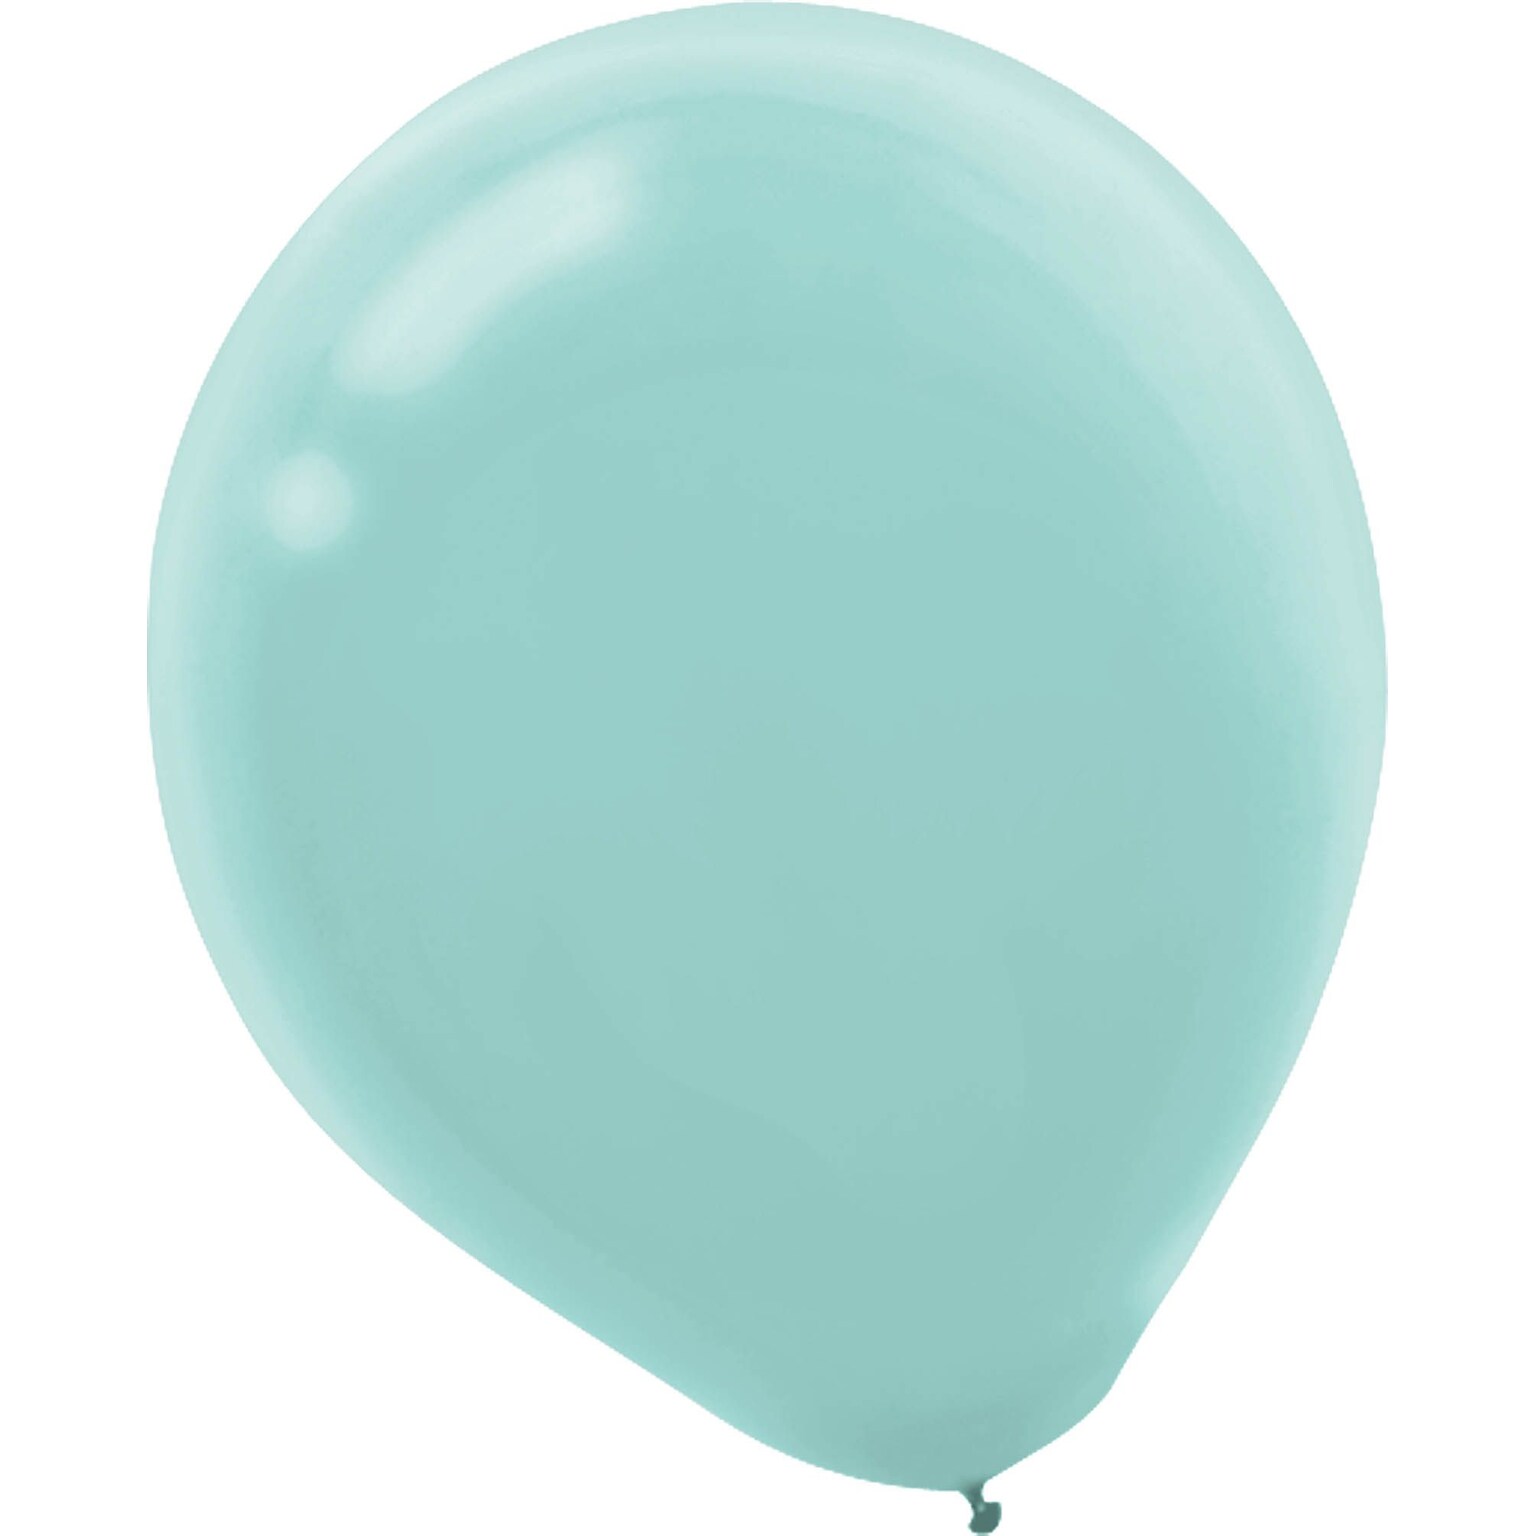 Amscan Solid Color Latex Balloons Packaged, 12, Robins Egg Blue, 4/Pack, 72 Per Pack (113250.121)